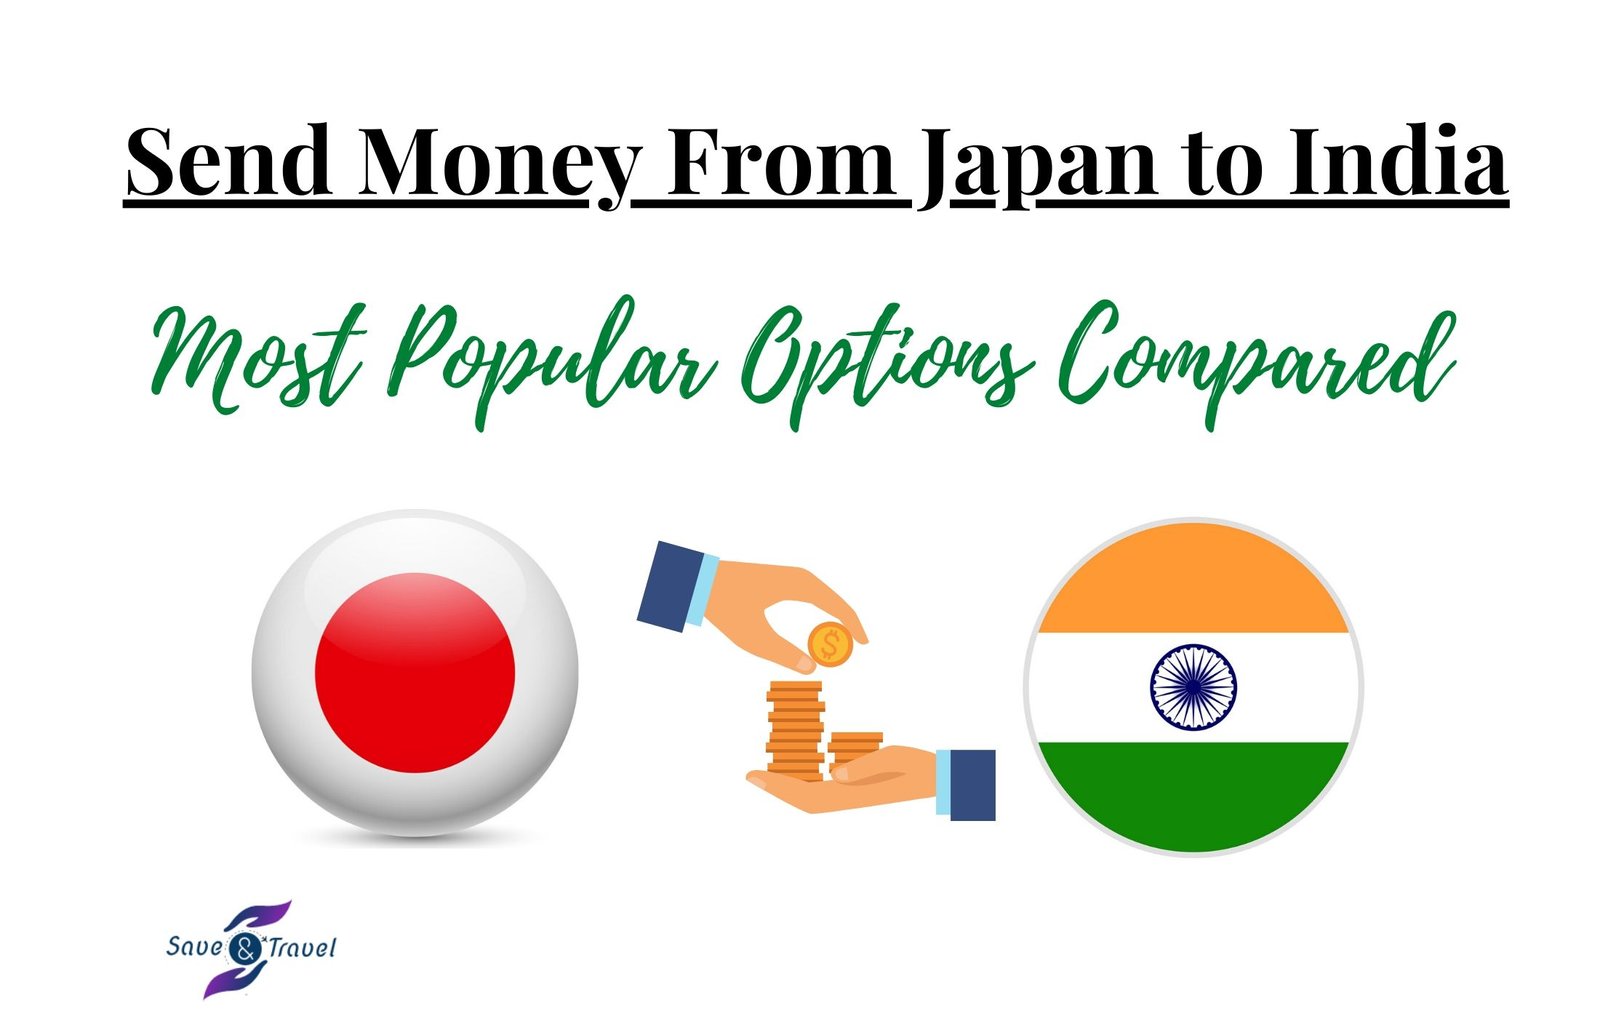 Send Money From Japan to India